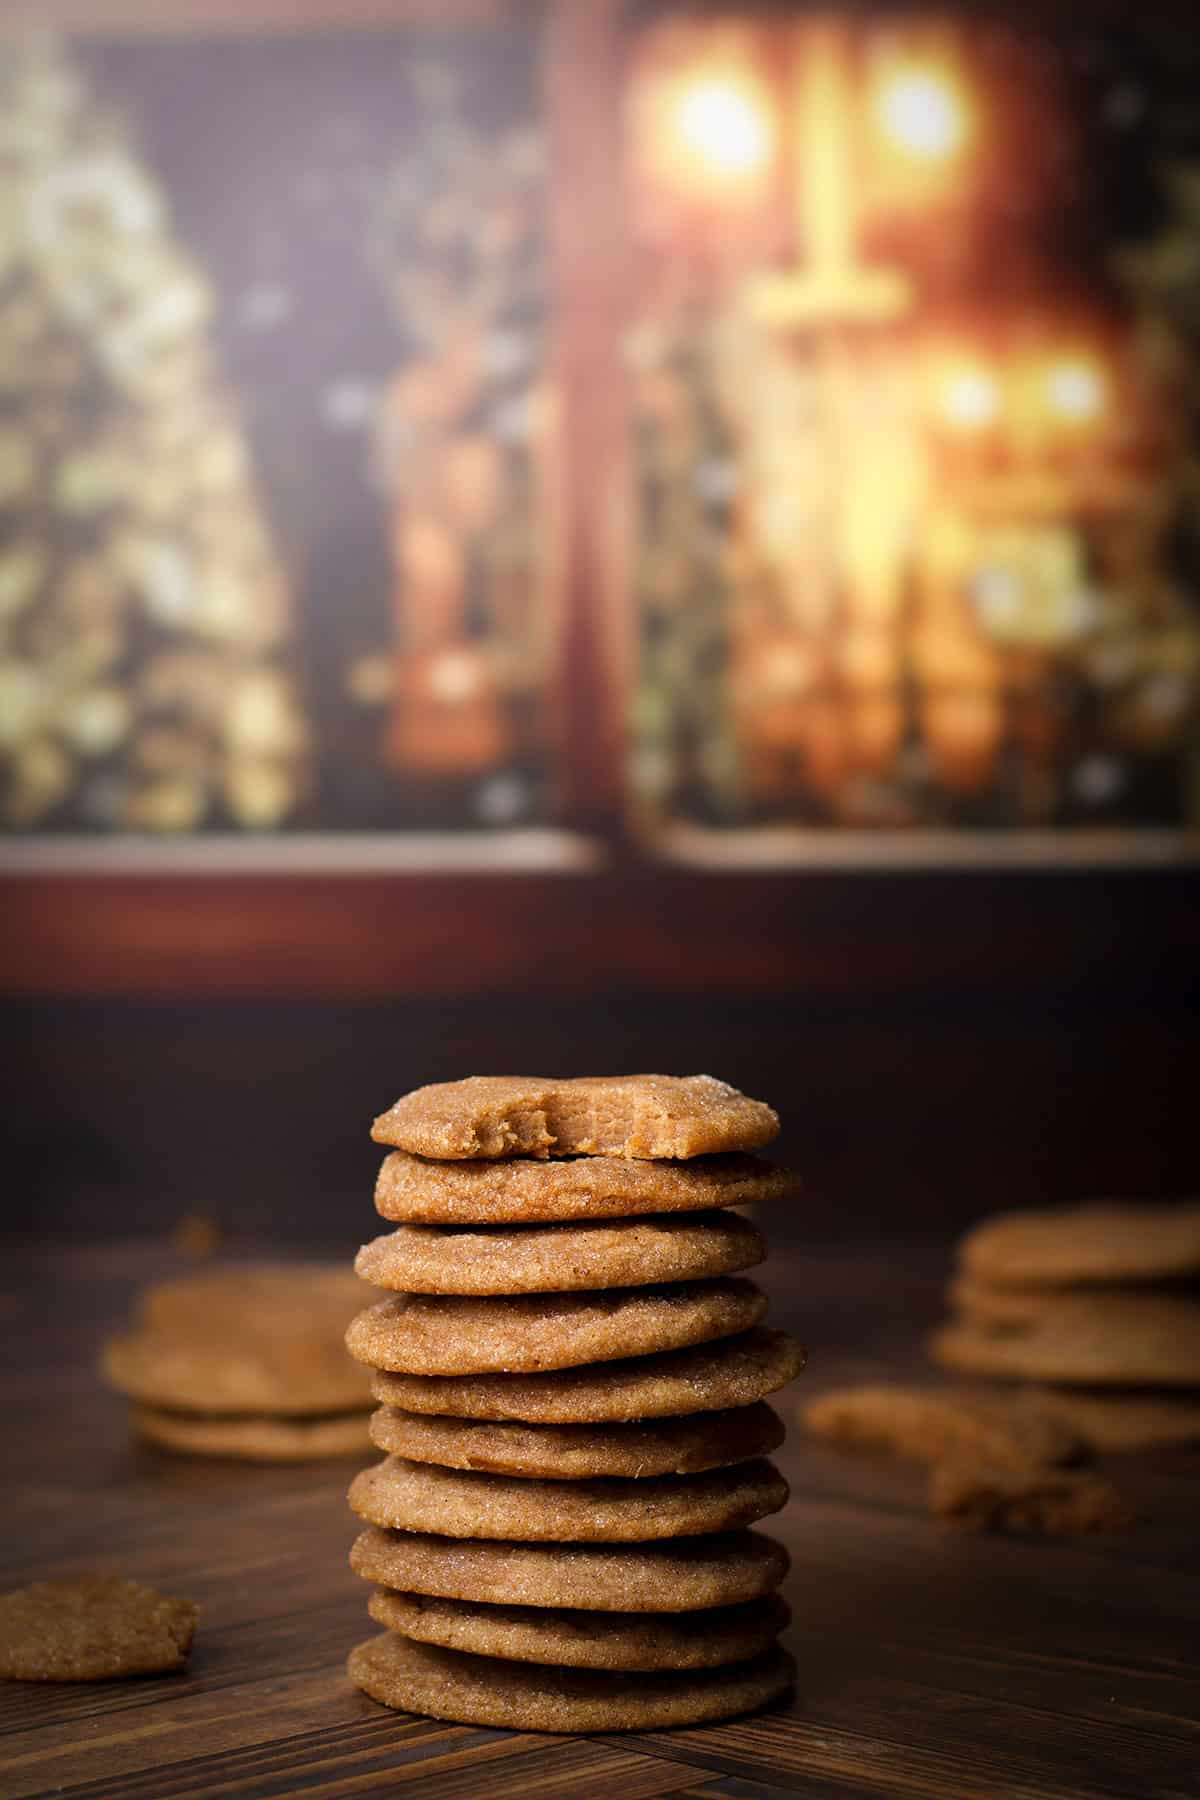 A tall stack of vanilla bean brown sugar cookies with a bite taken out of the cookie on the top of the stack.